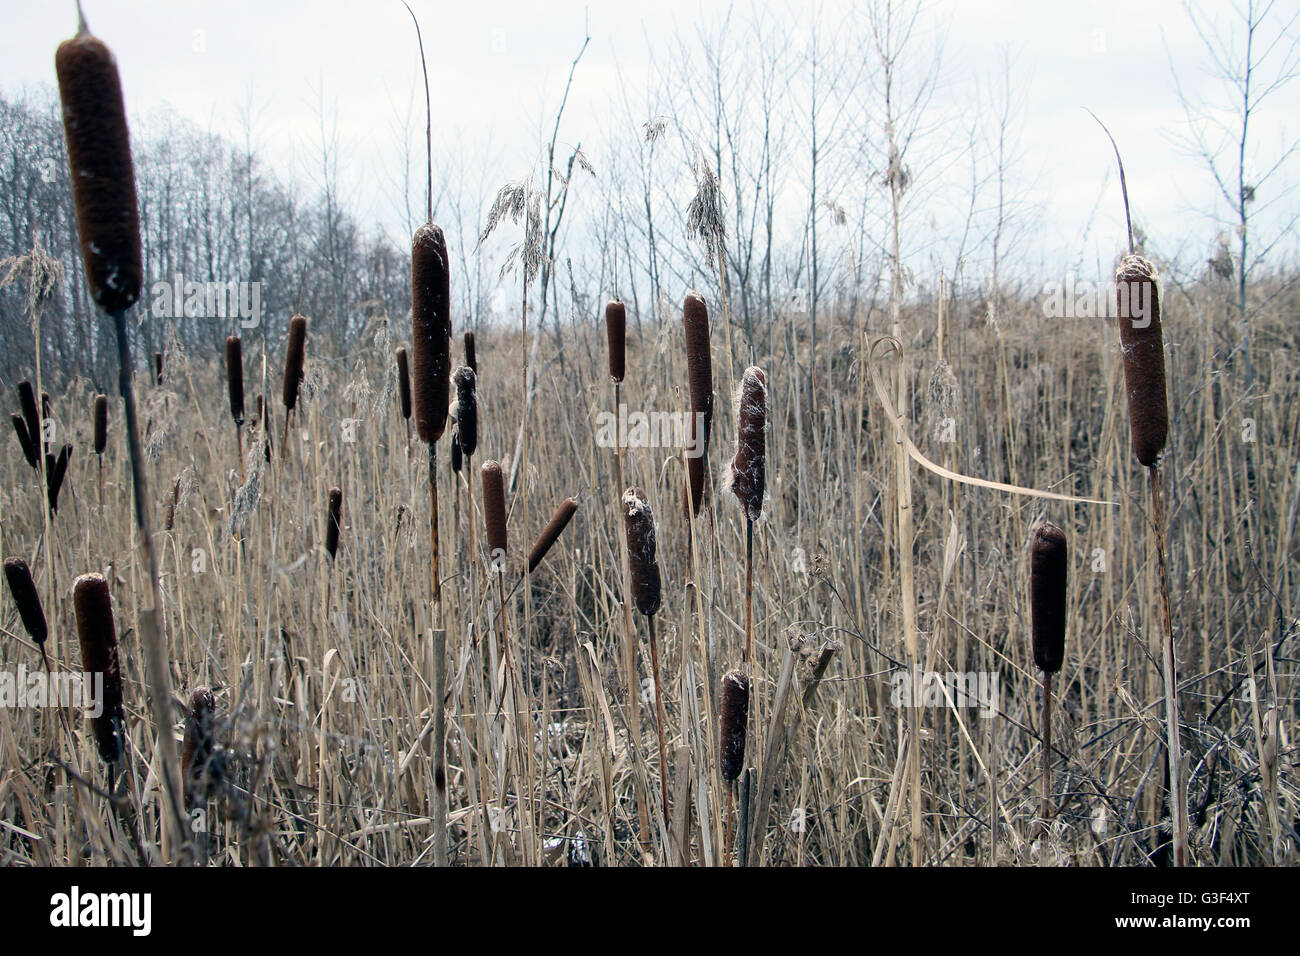 Tifa cattails typha giunco giunchi lamelle reed totoras marsh palude Foto Stock